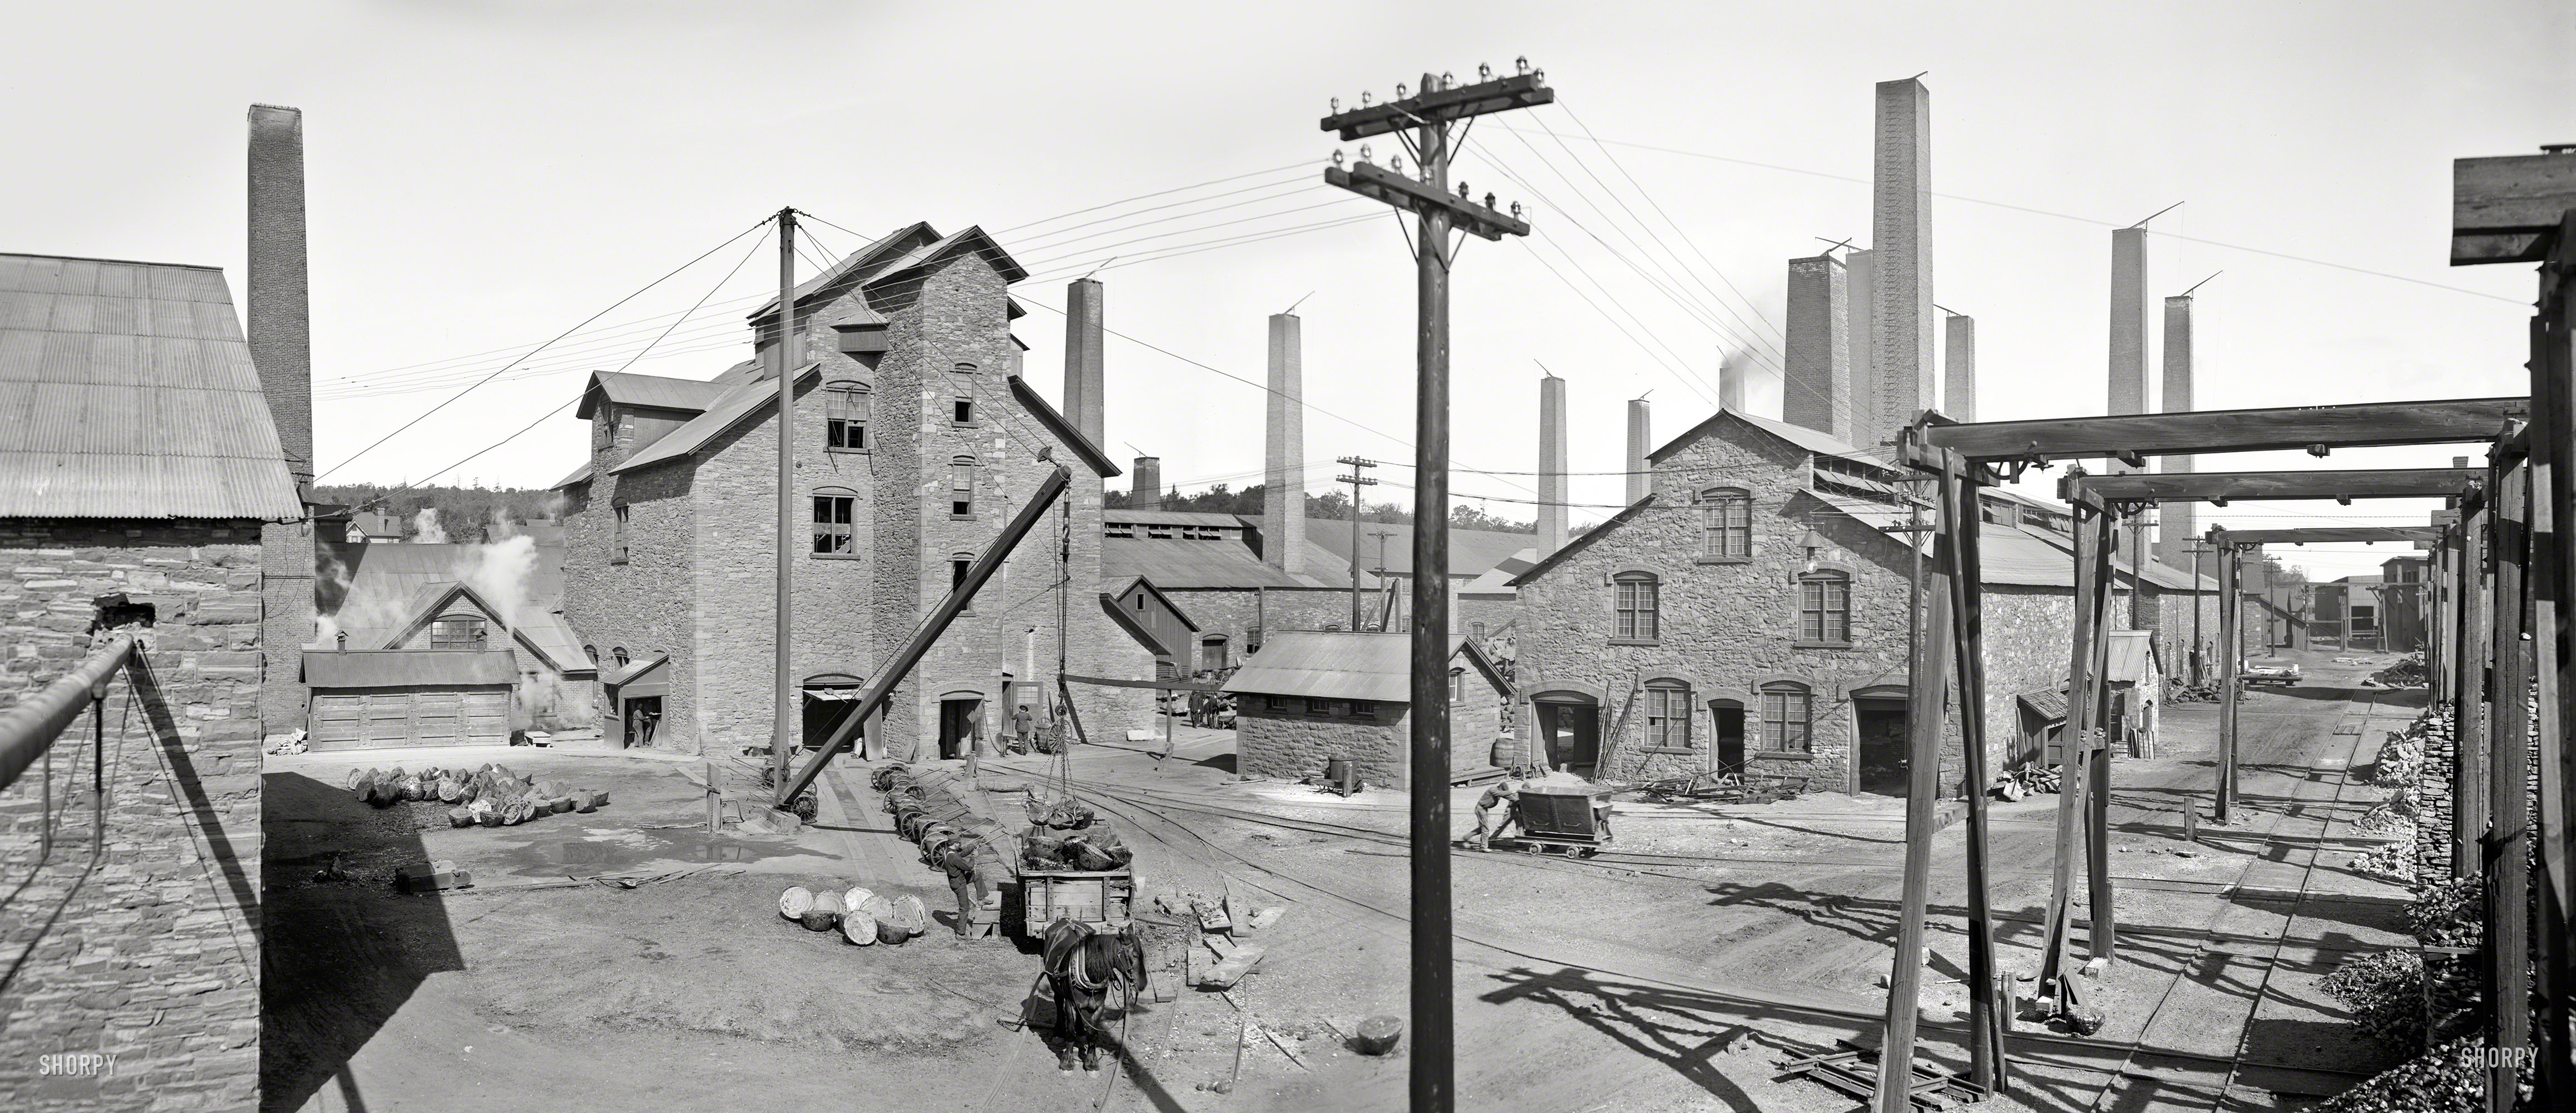 Circa 1905. "Calumet and Hecla smelters, Lake Linden, Michigan." Starting point for the web of copper telephone and streetcar wires seen in so many of the other Detroit Publishing images. Panorama of two 8x10 glass plates. View full size.